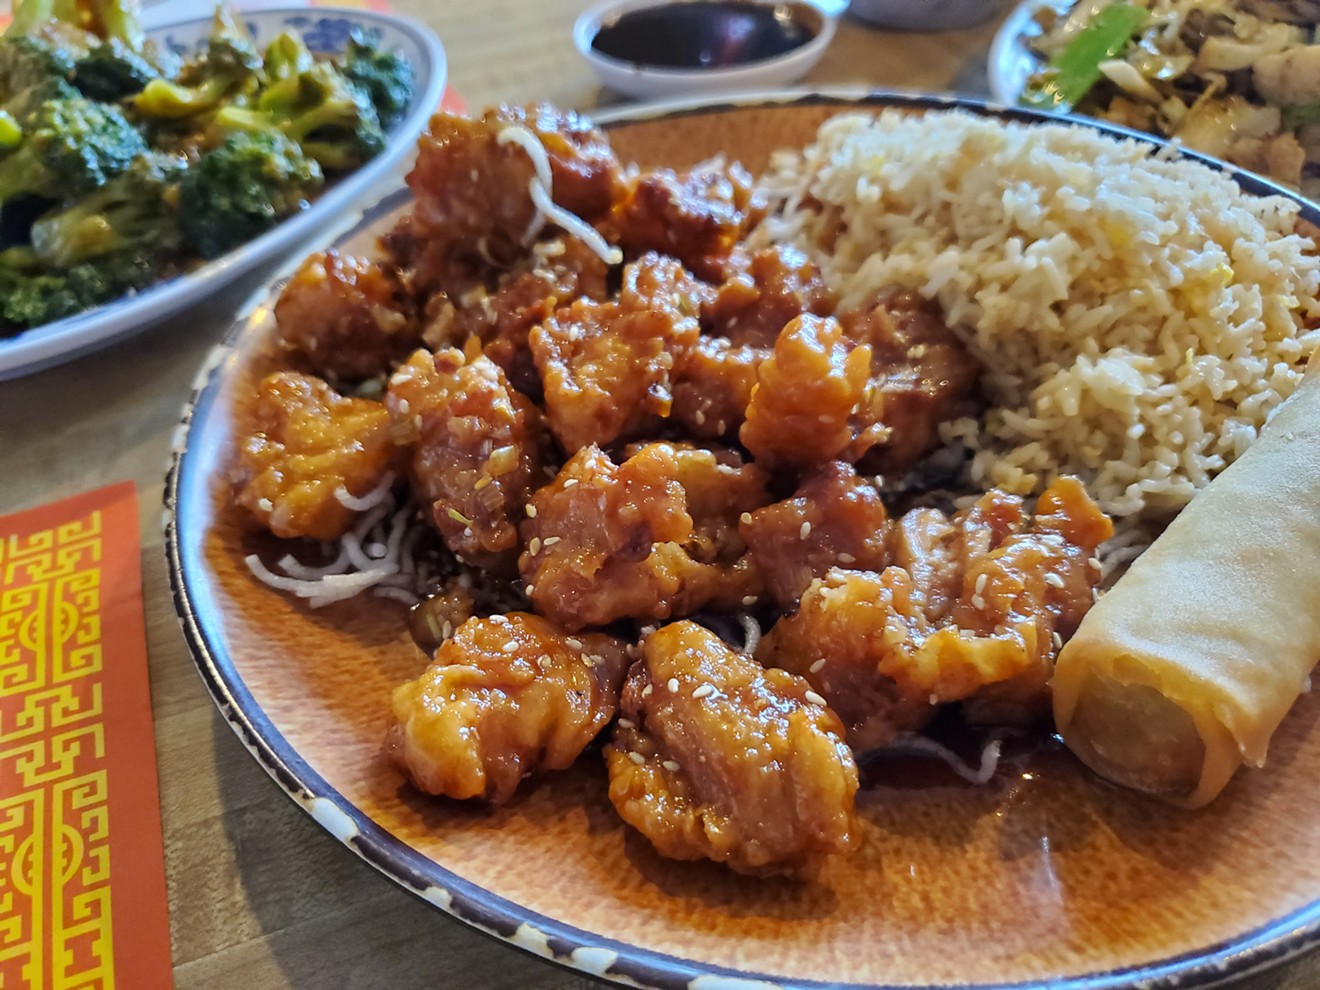 The sesame chicken is the star at Peter's Chinese.